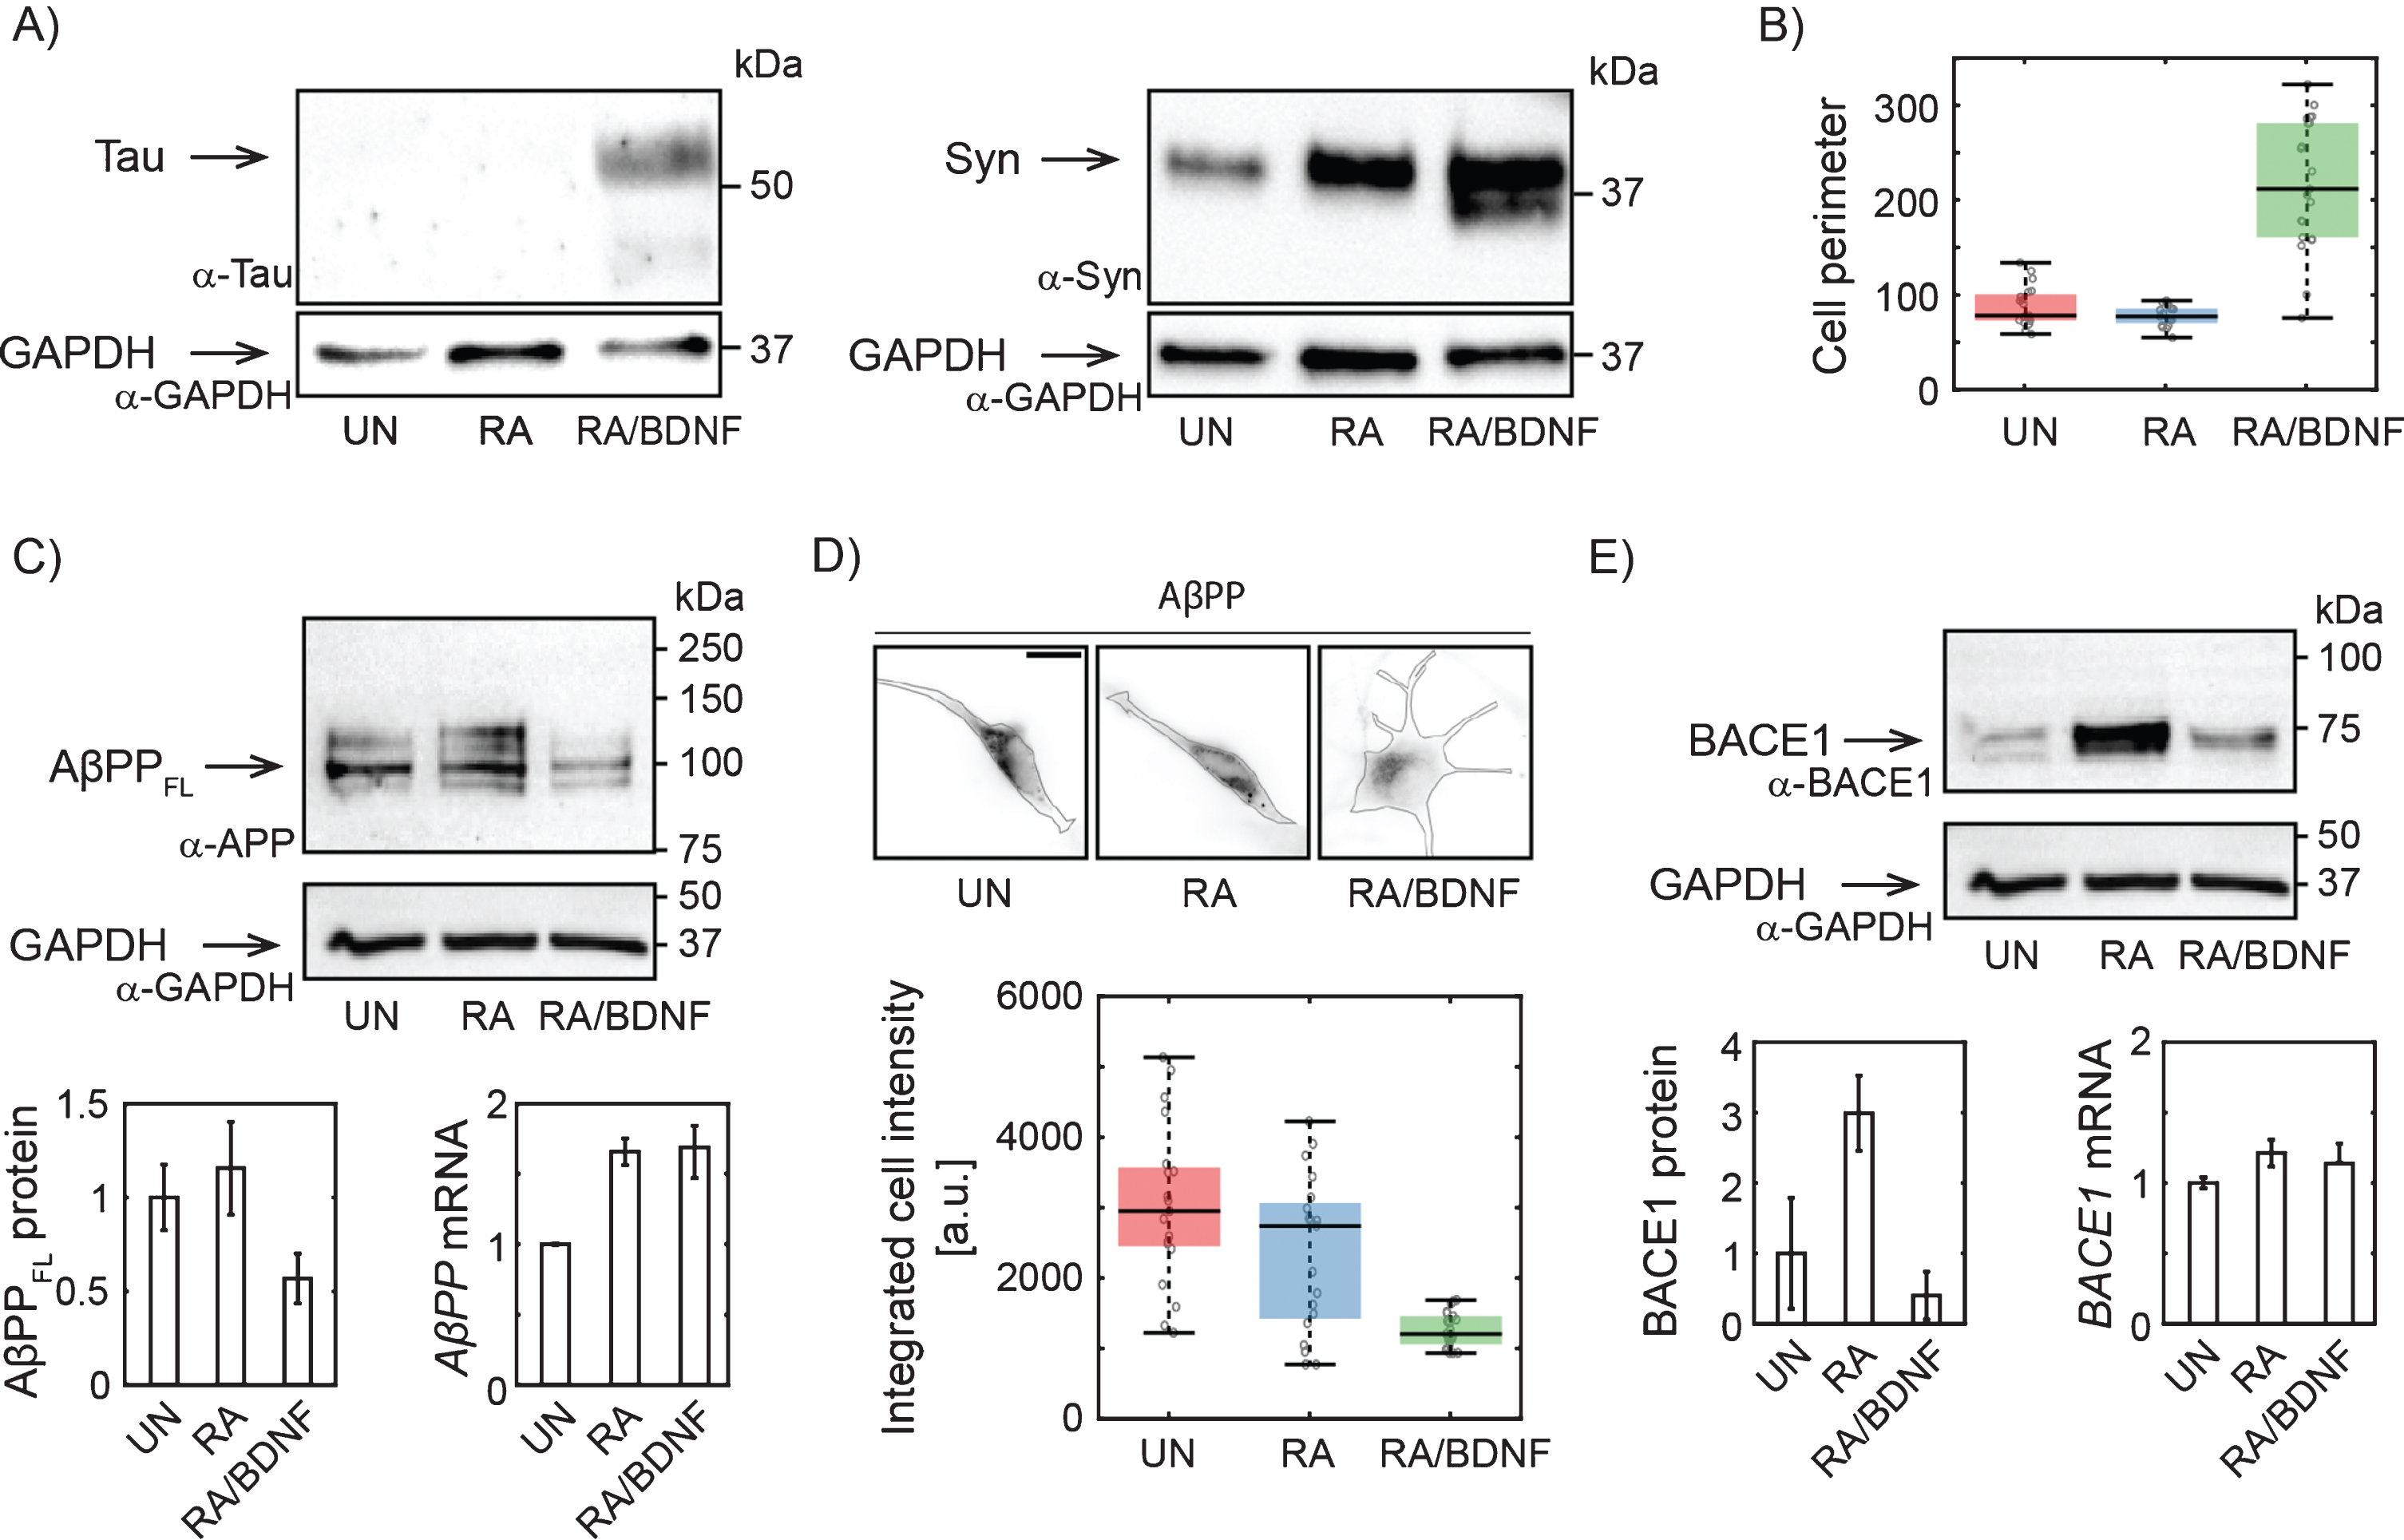 Changes in AβPP expression in SH-SY5Y cells upon differentiation. A) Western blots showing increased expression of Tau upon full differentiation with RA and BDNF and Syn (synaptophysin) upon RA treatment. Antibodies: anti-tau, AXON Neuroscience, DC25; Anti-Syn, Abcam, ab32594; Anti-GAPDH, Merck, ABS16. B) Box-plot of cell perimeter changing with a differentiation state. Cell perimeters were determined using particle analysis plugin in ImageJ. C) Immunoblot showing full lengths AβPP protein levels (antibody to N terminus; aa 66–81: clone 22C11, Merck, MAB348) in SH-SY5Y cells differentiated with RA or RA/BDNF. AβPP mRNA levels were determined in total RNA extract by RT-qPCR. The expression of AβPPFL was normalized to the GAPDH data from 4 (WB), or 3 (RT-qPCR) independent experiments; error bars represent standard error of the mean. D) Representative immunofluorescence images of SH-SY5Y cells treated (or not) with RA or RA/BDNF. The scale bar 10μm. The graph shows integrated signal for AβPP quantified from the images of fixed, immunofluorescently-labeled SH-SY5Y cells (same antibody as in C). Final intensity values were normalized with respect to the total cell area. E) BACE1 protein (antibody: Cell Signaling Technology, D10E5) and mRNA levels at different differentiation states. UN, undifferentiated cells; RA, cells differentiated with retinoic acid; RA/BDNF, cells differentiated with RA and BDNF.